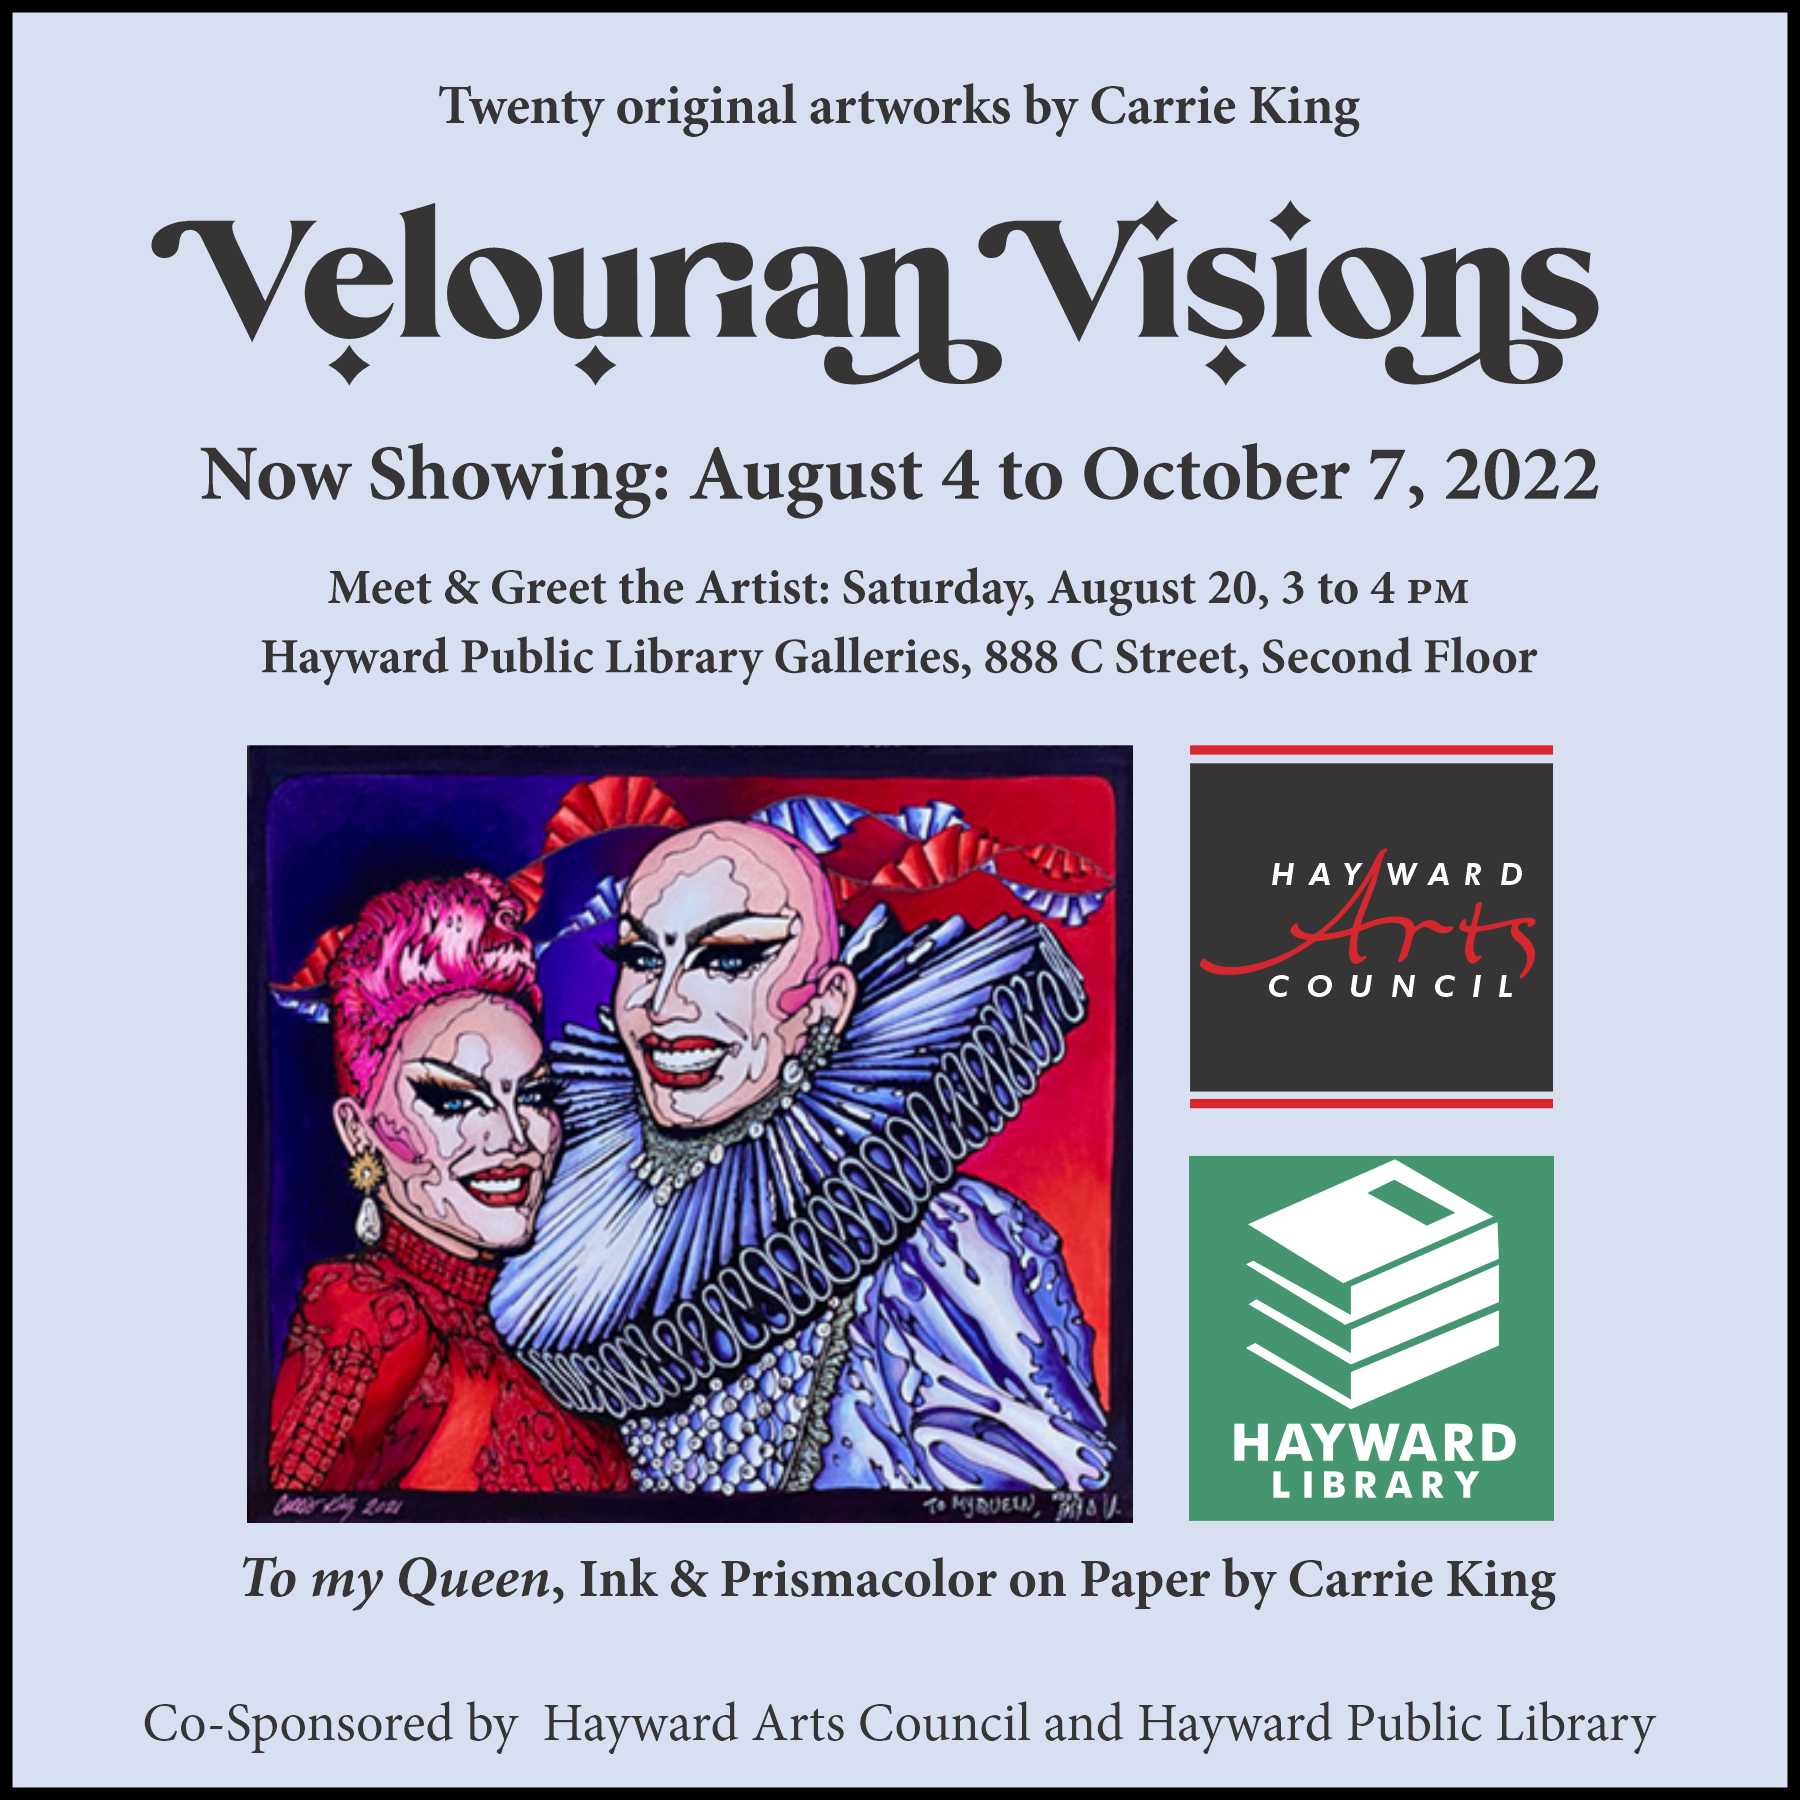 Velourian Visions Art Exhibit Featuring the Art of Carrie King. Meet & Greet Carrie King on August 20 3-4 pm